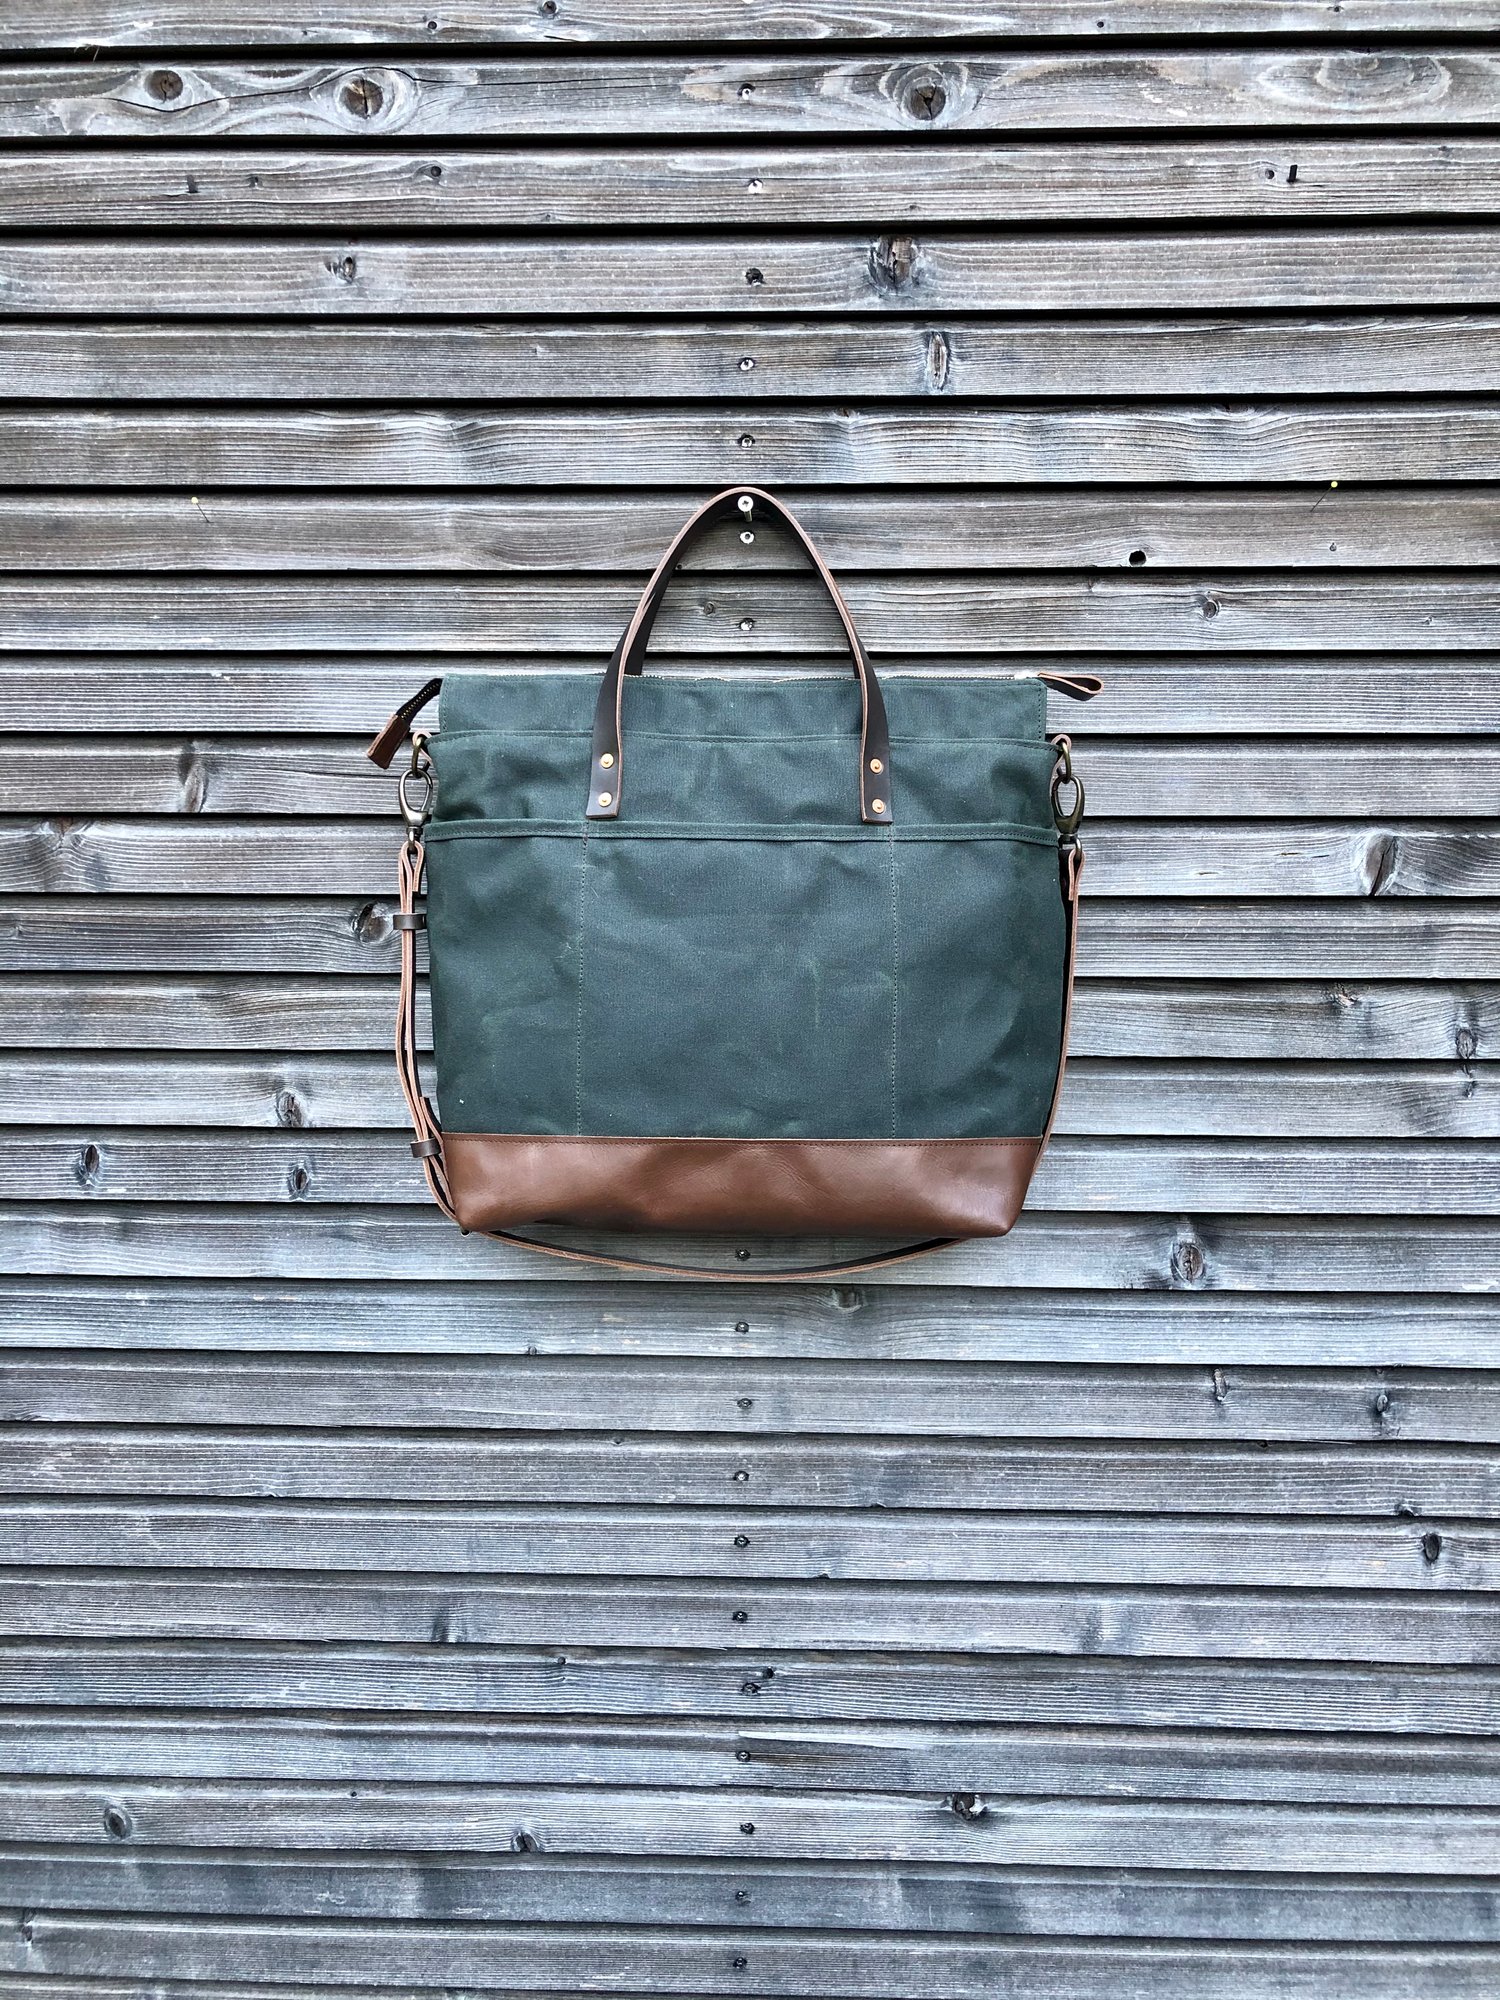 Waxed canvas tote bag / office bag with luggage handle attachment ...